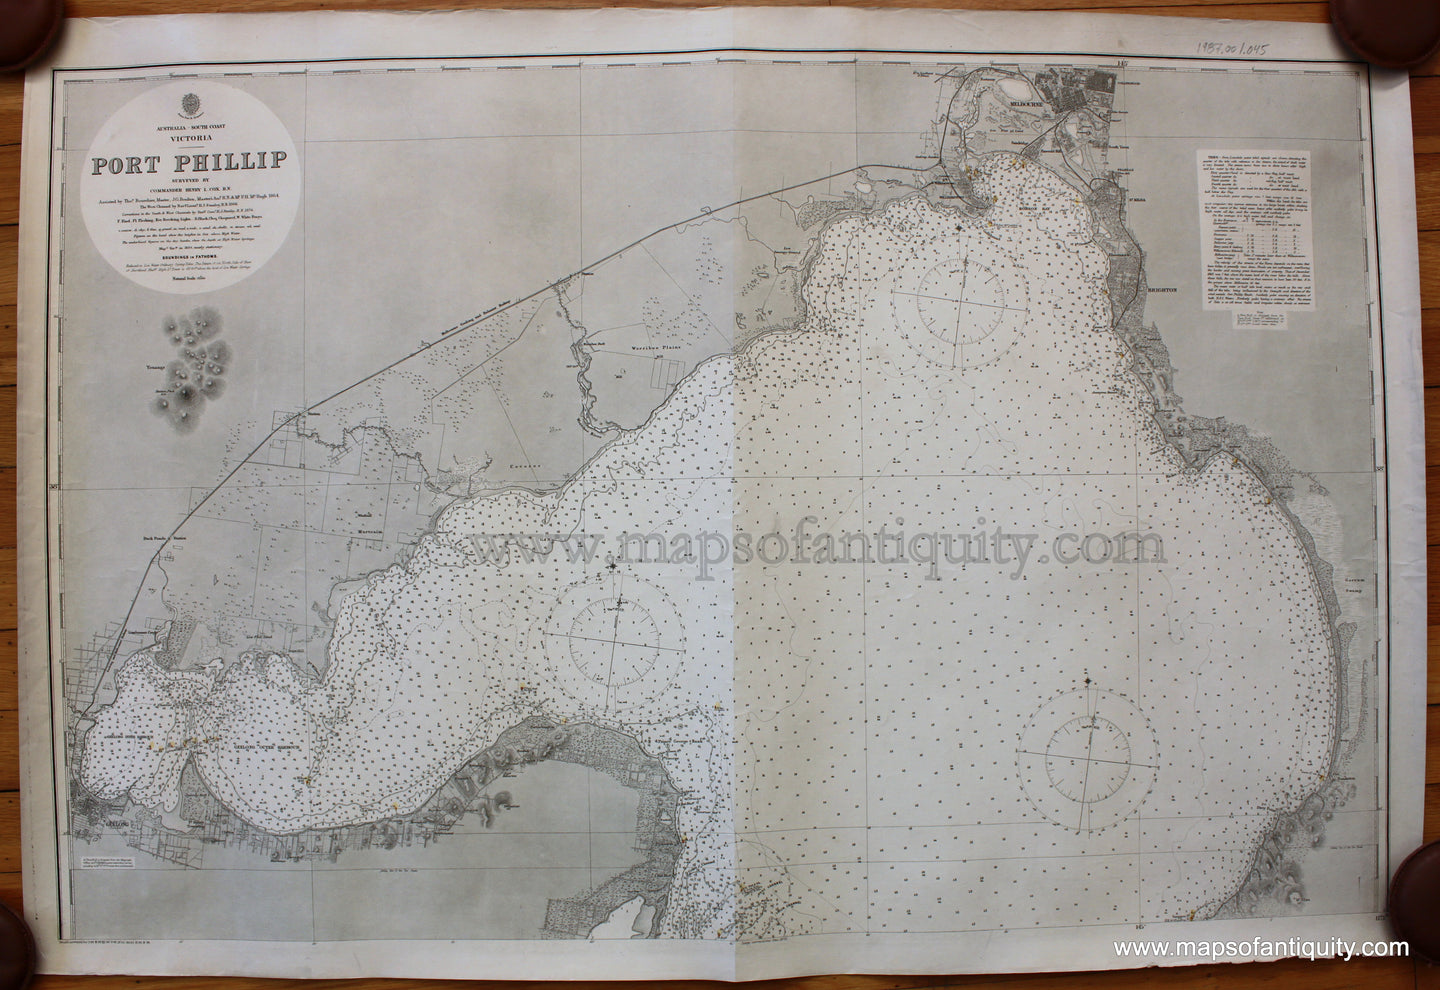 Antique-Black-and-White-Nautical-Chart-Port-Phillip-1894-Hydrographic-Office-of-the-British-Admiralty-Pacific-Australia-Charts-1800s-19th-century-Maps-of-Antiquity